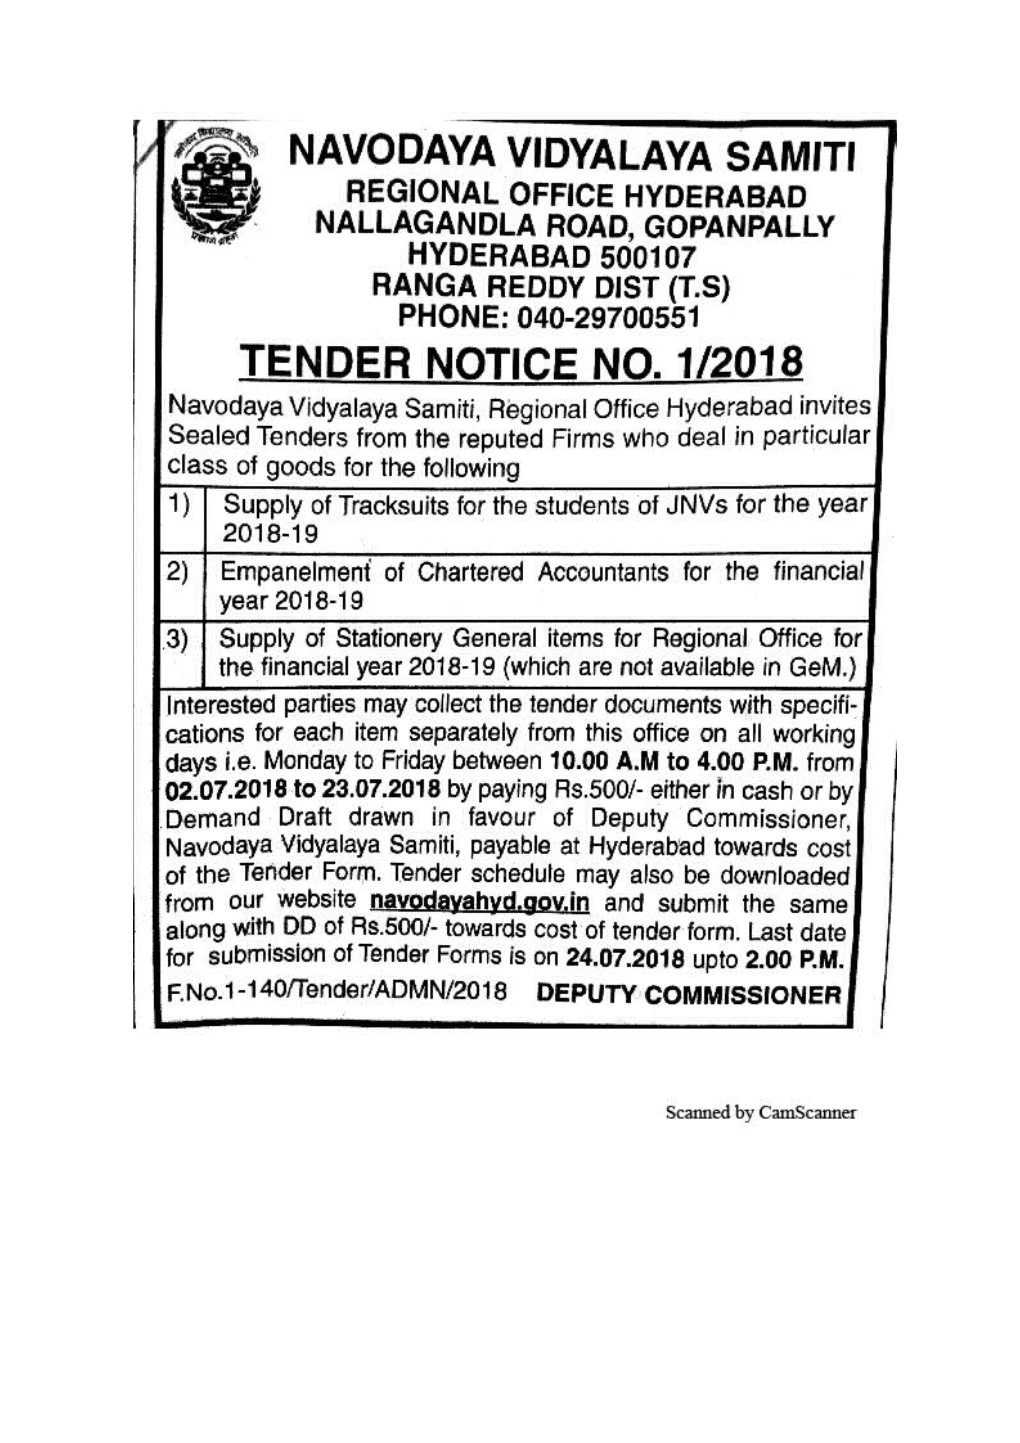 Tender Formfor Supply of Stationery/General Items